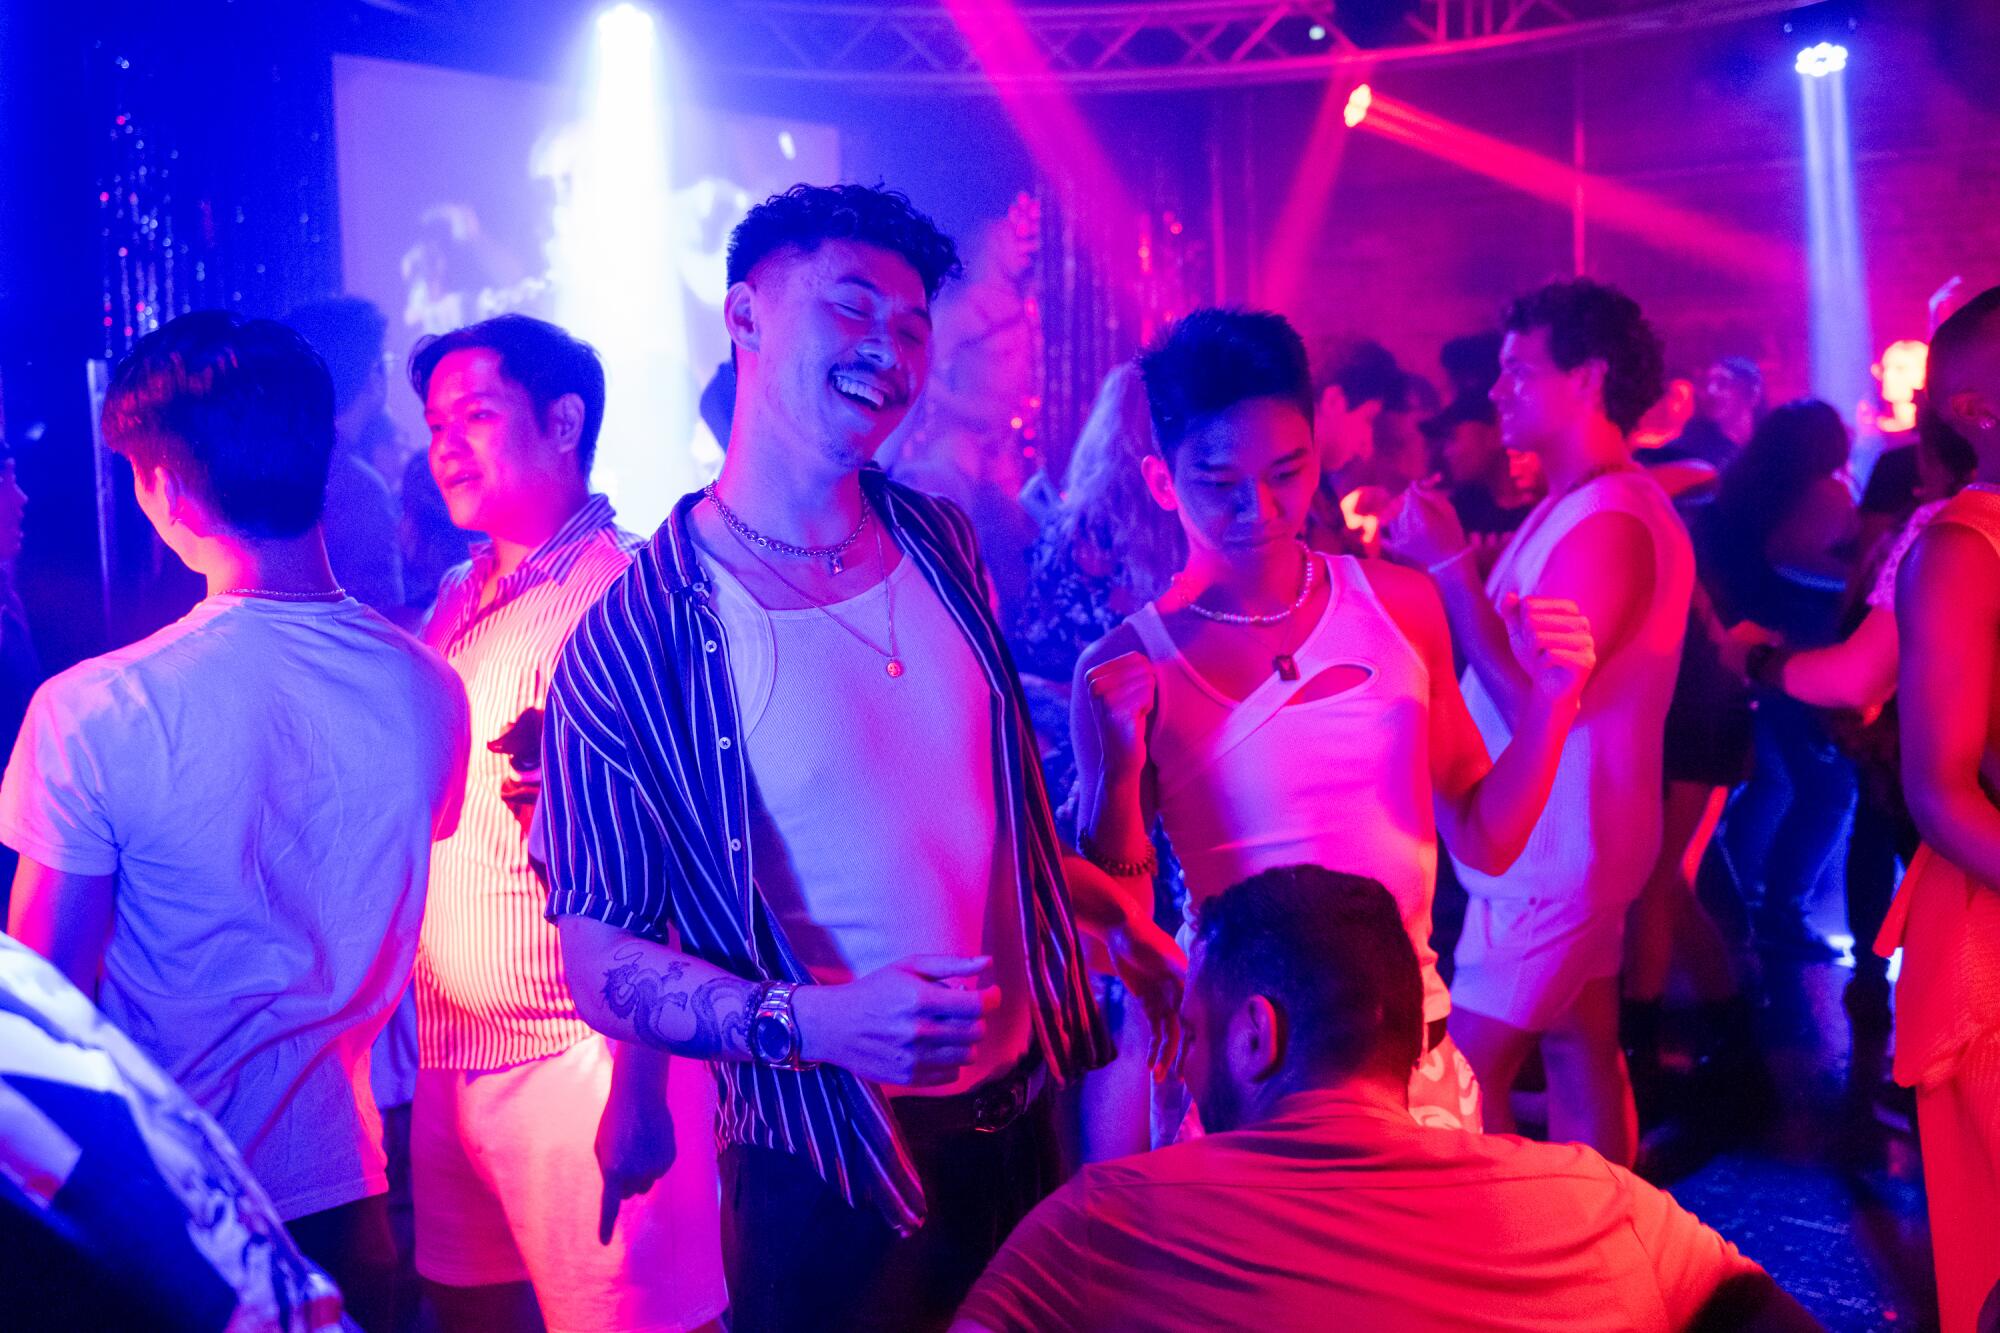 Donny Vu, center-left, and Jon dance at QT Nightlife's K-Pop Night at Micky's West Hollywood.